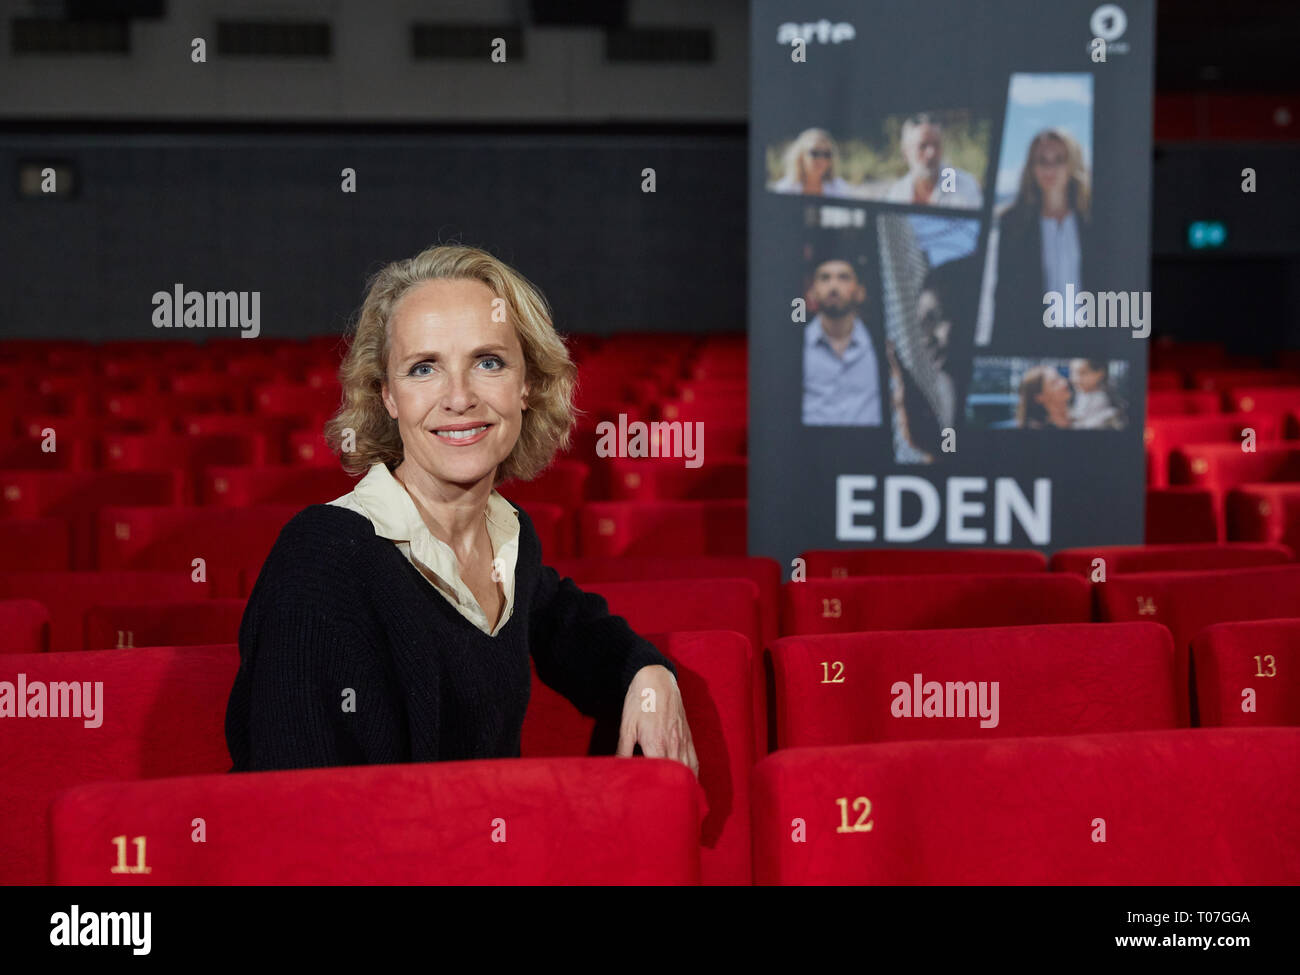 Hamburg, Germany. 18th Mar, 2019. Juliane Köhler, German actress, sits in the Abaton cinema during a photo session on the German-French film project 'Eden'. The six-part is broadcast in May on arte and in the first. Credit: Georg Wendt/dpa/Alamy Live News Stock Photo